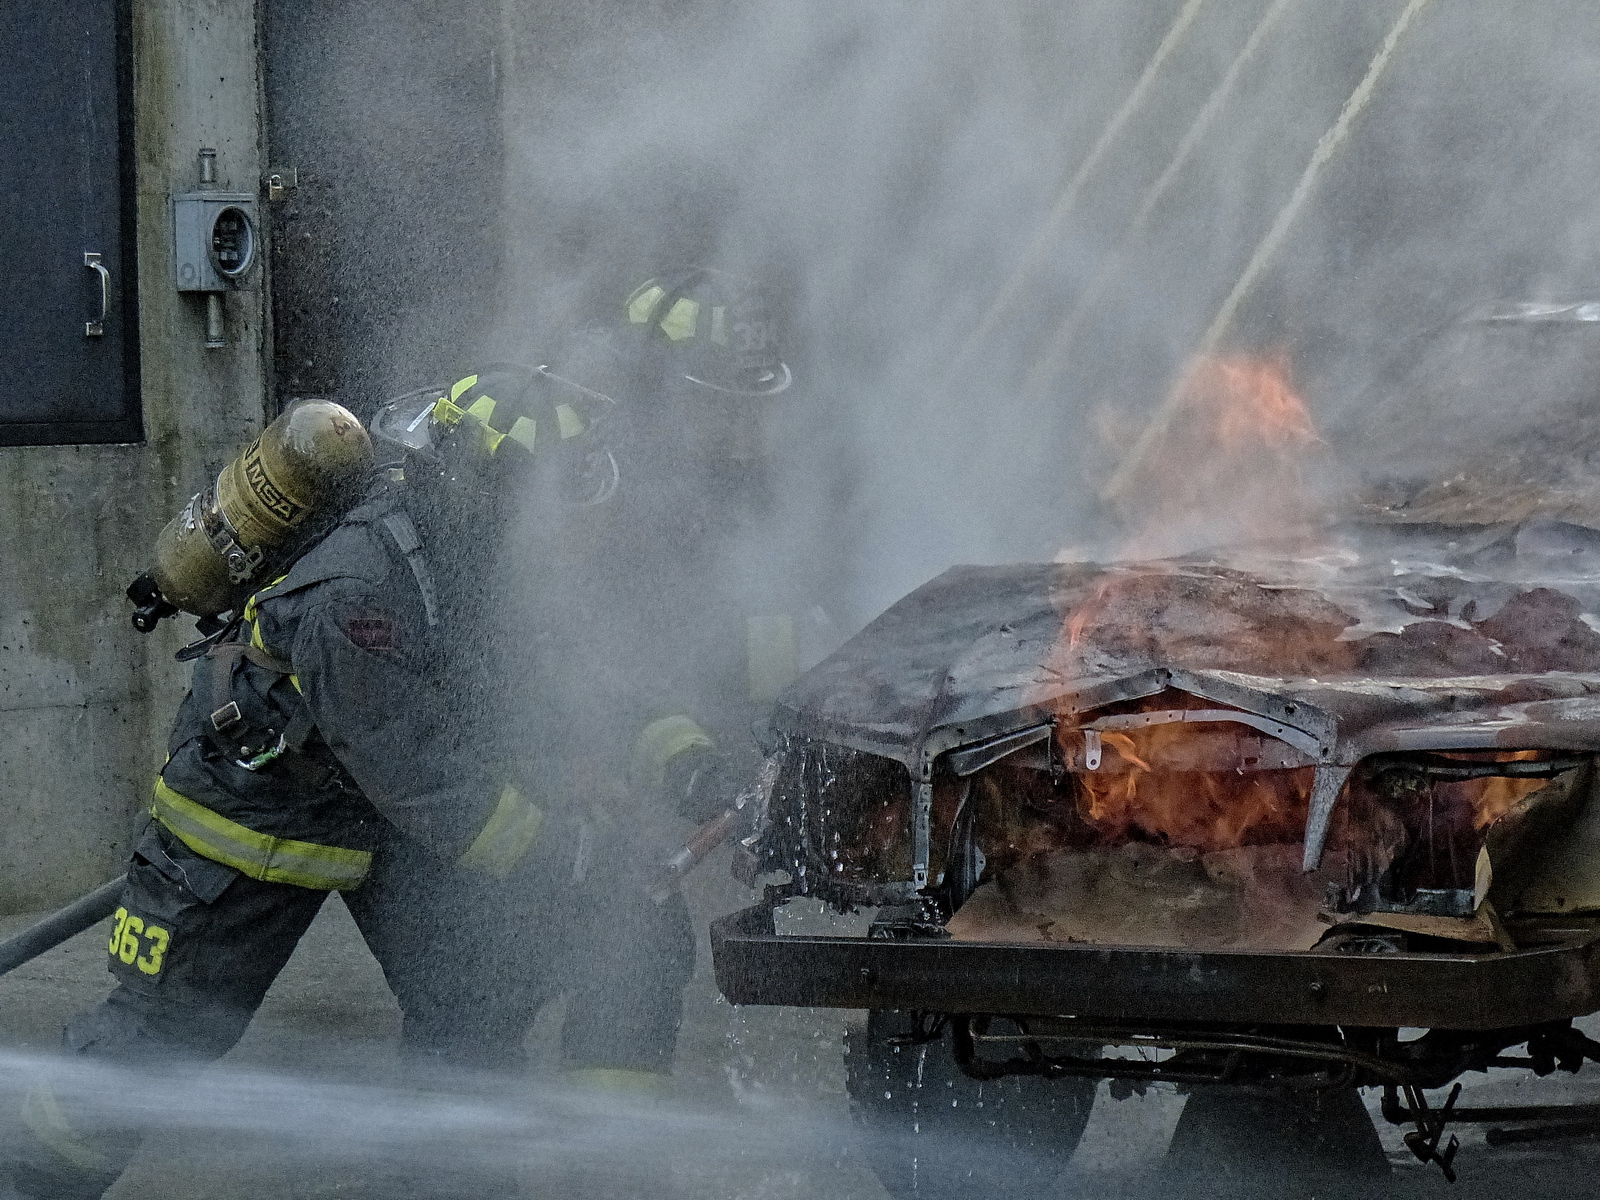 Prying open the hood of a car on fire